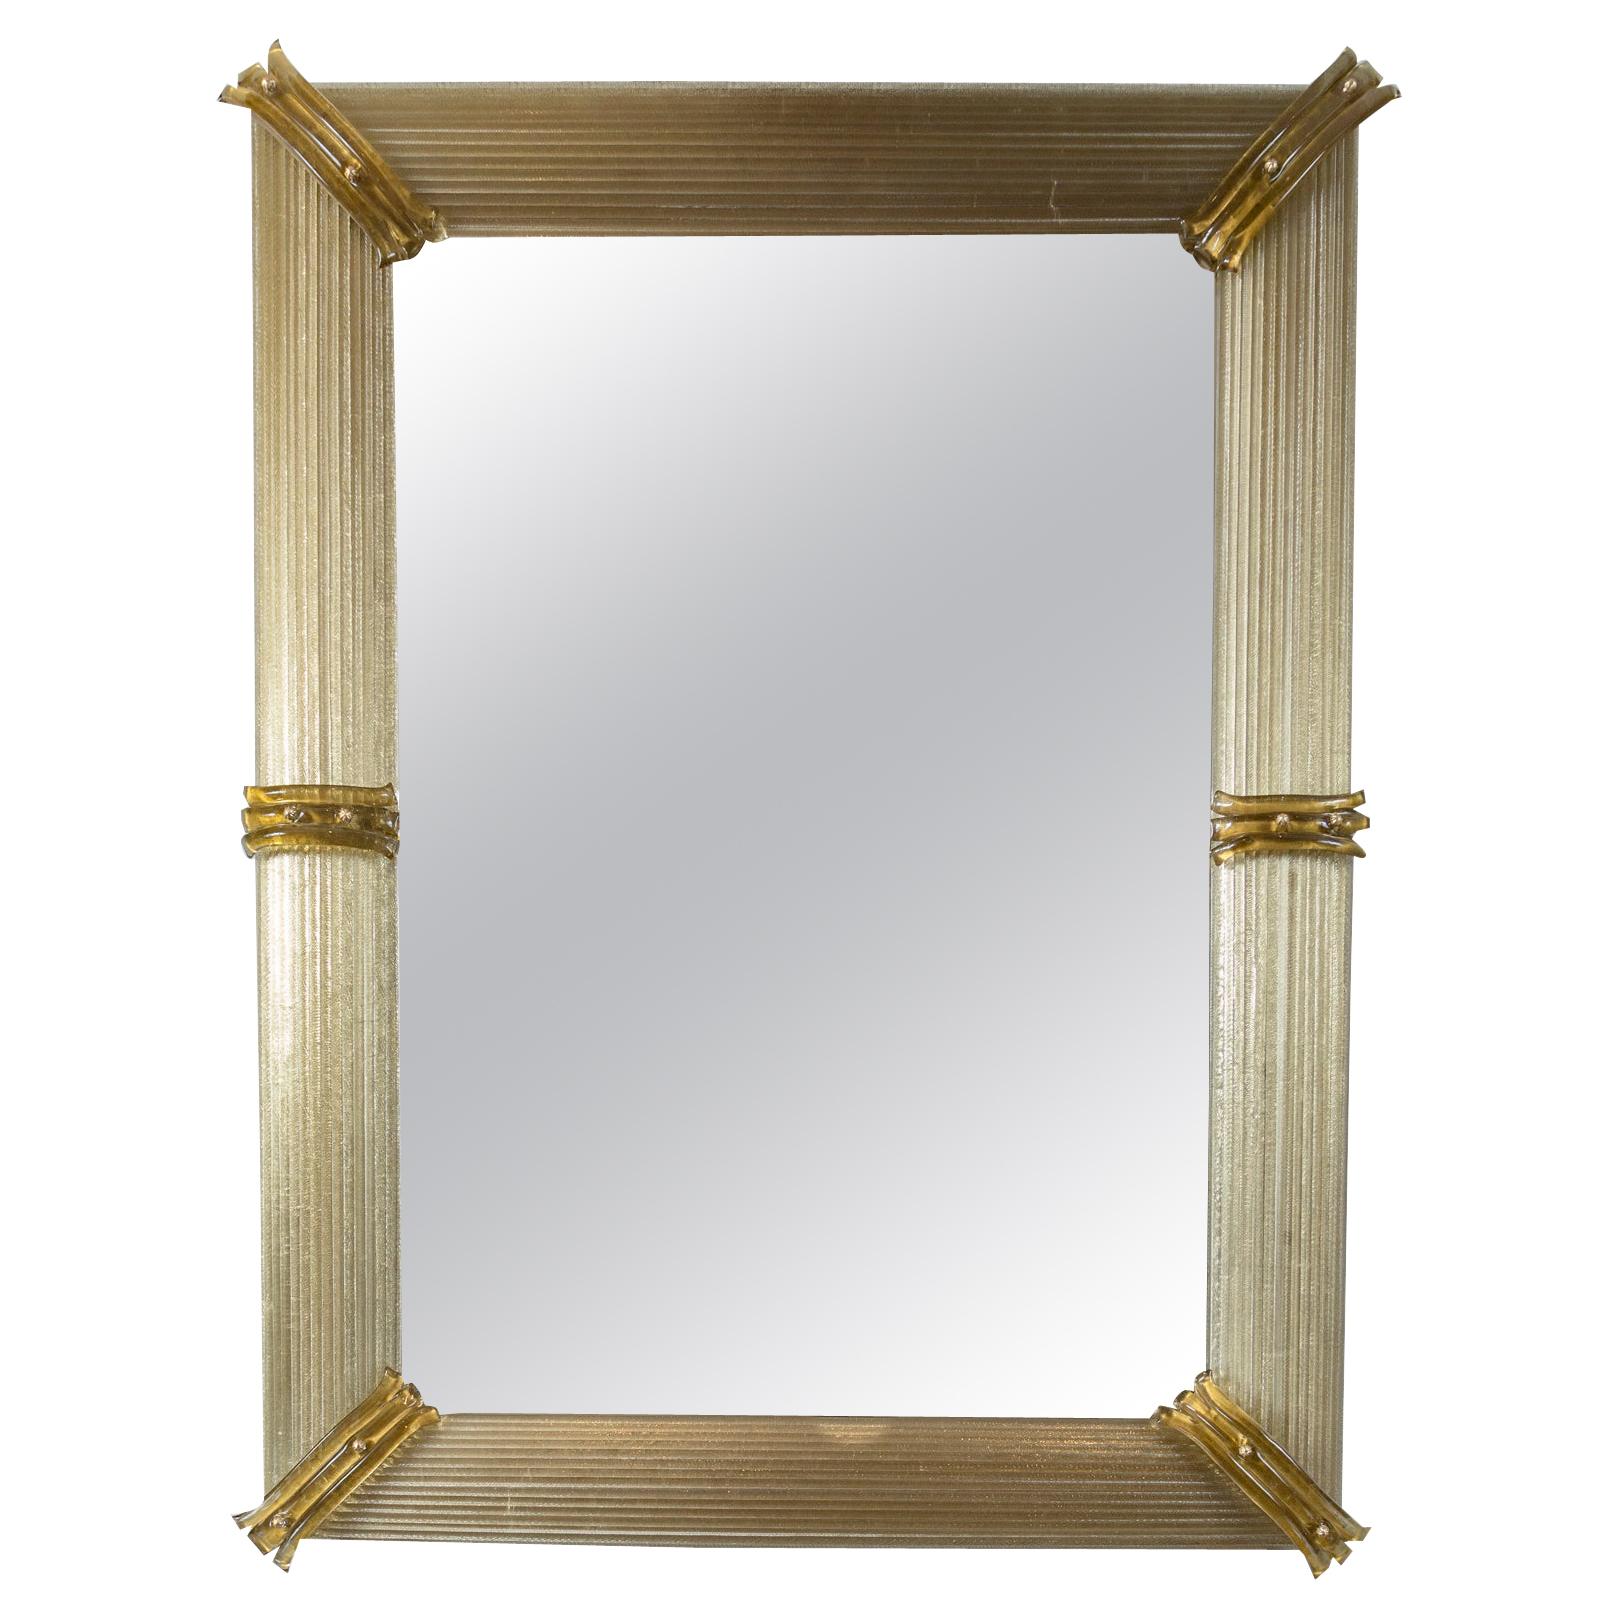 Lovely custom artisan blown taupe glass framed mirror, frame comprised of long blown twisting straw rods
Weight approx 60 lbs, (crate to ship provided )
Date: Contemporary
Origin: Murano, Italy
Condition: Excellent
Dimensions: 38 1/2” long x 58”